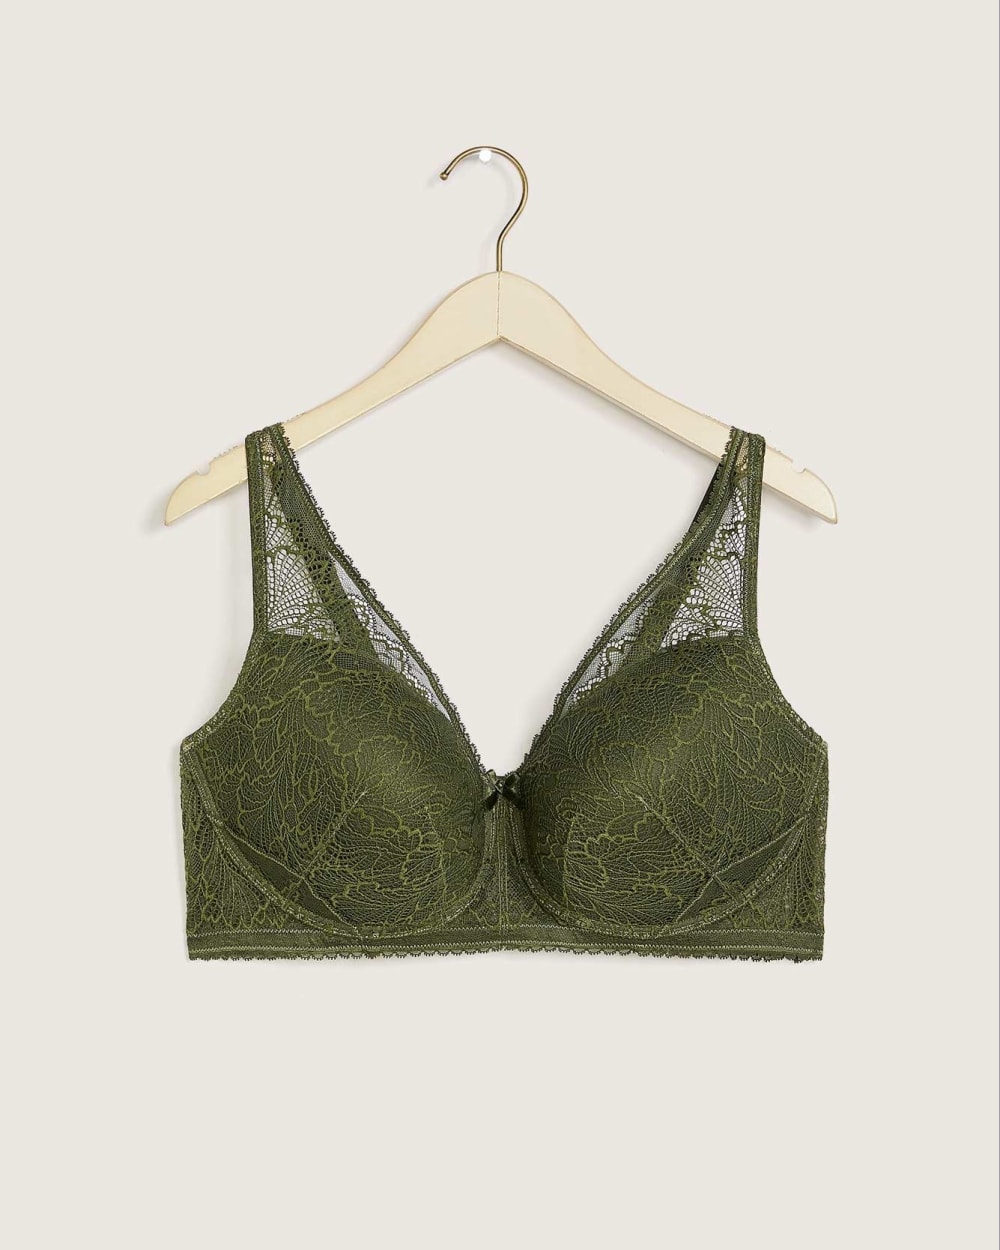 All-Over Lace Wireless Padded Bralette - Déesse Collection